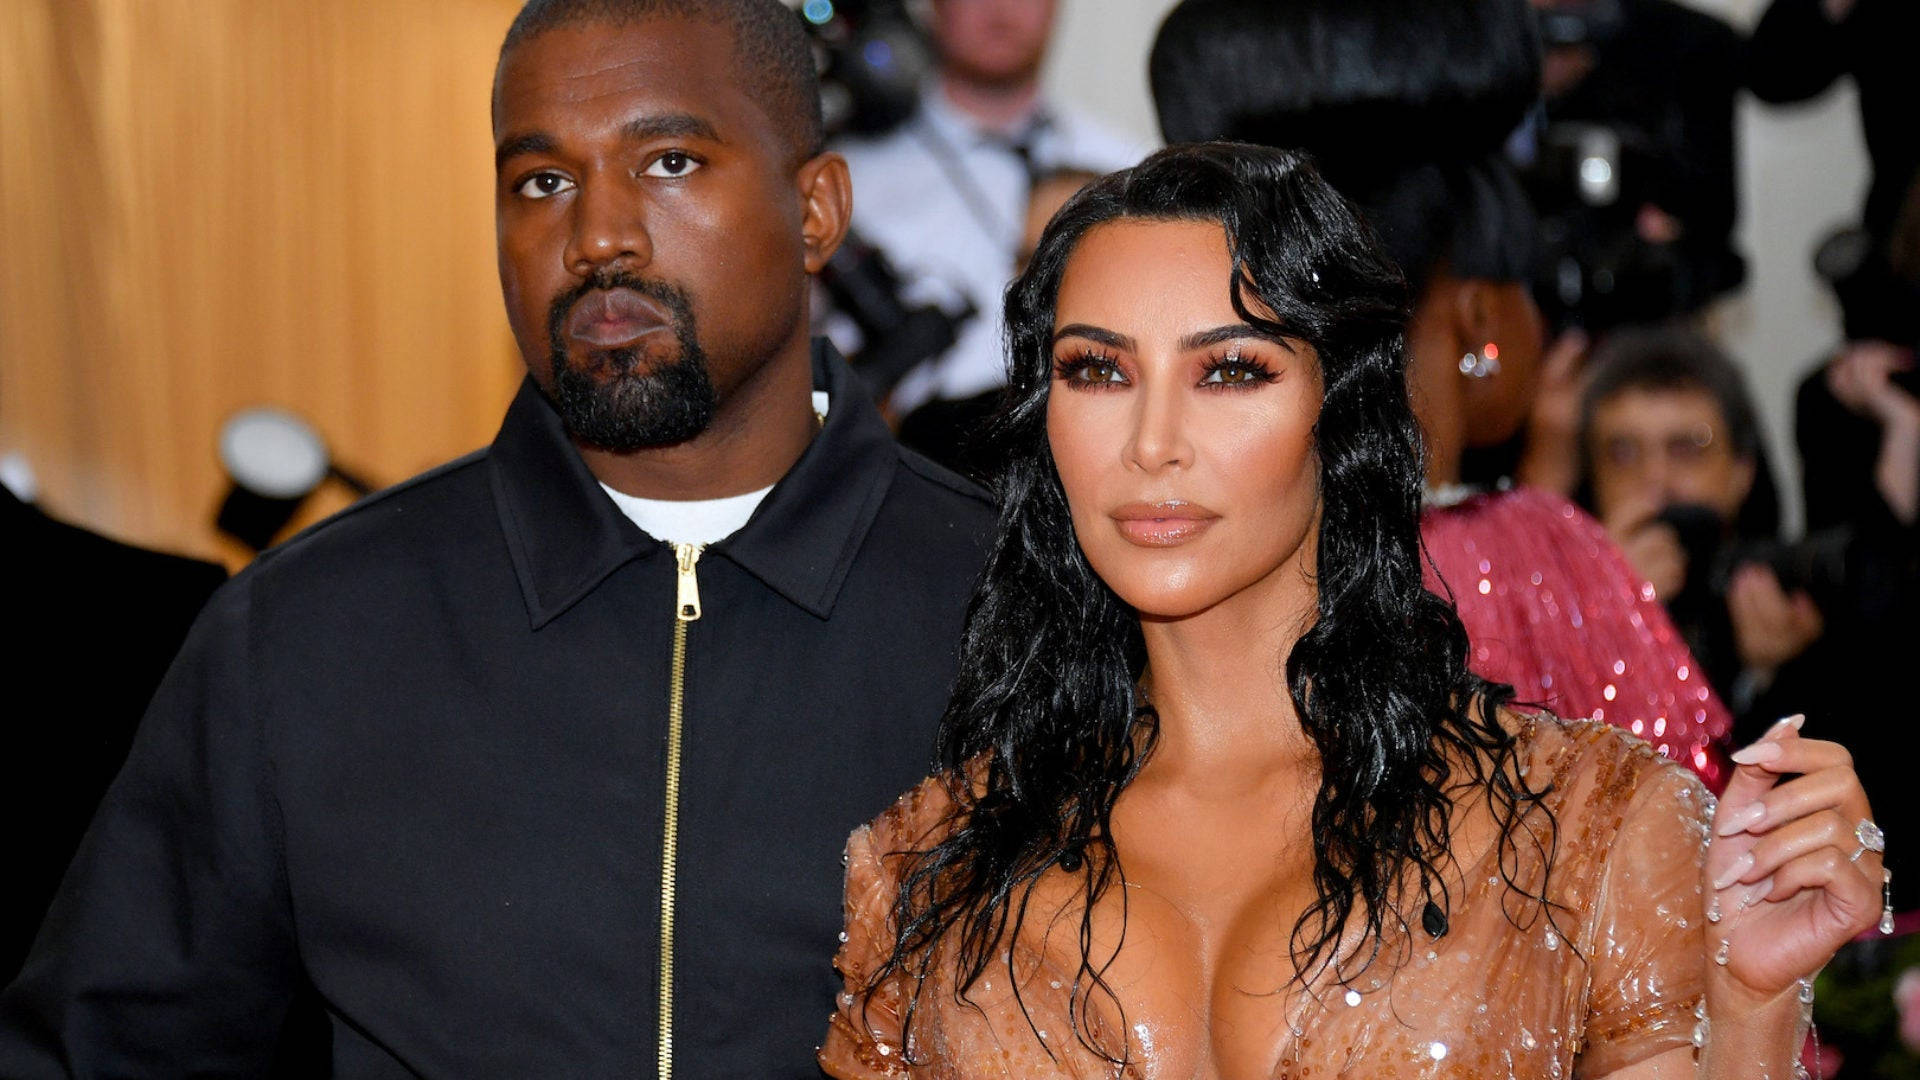 Kim Kardashian And Kanye West Pose For A Photoshoot At The Met Gala Background